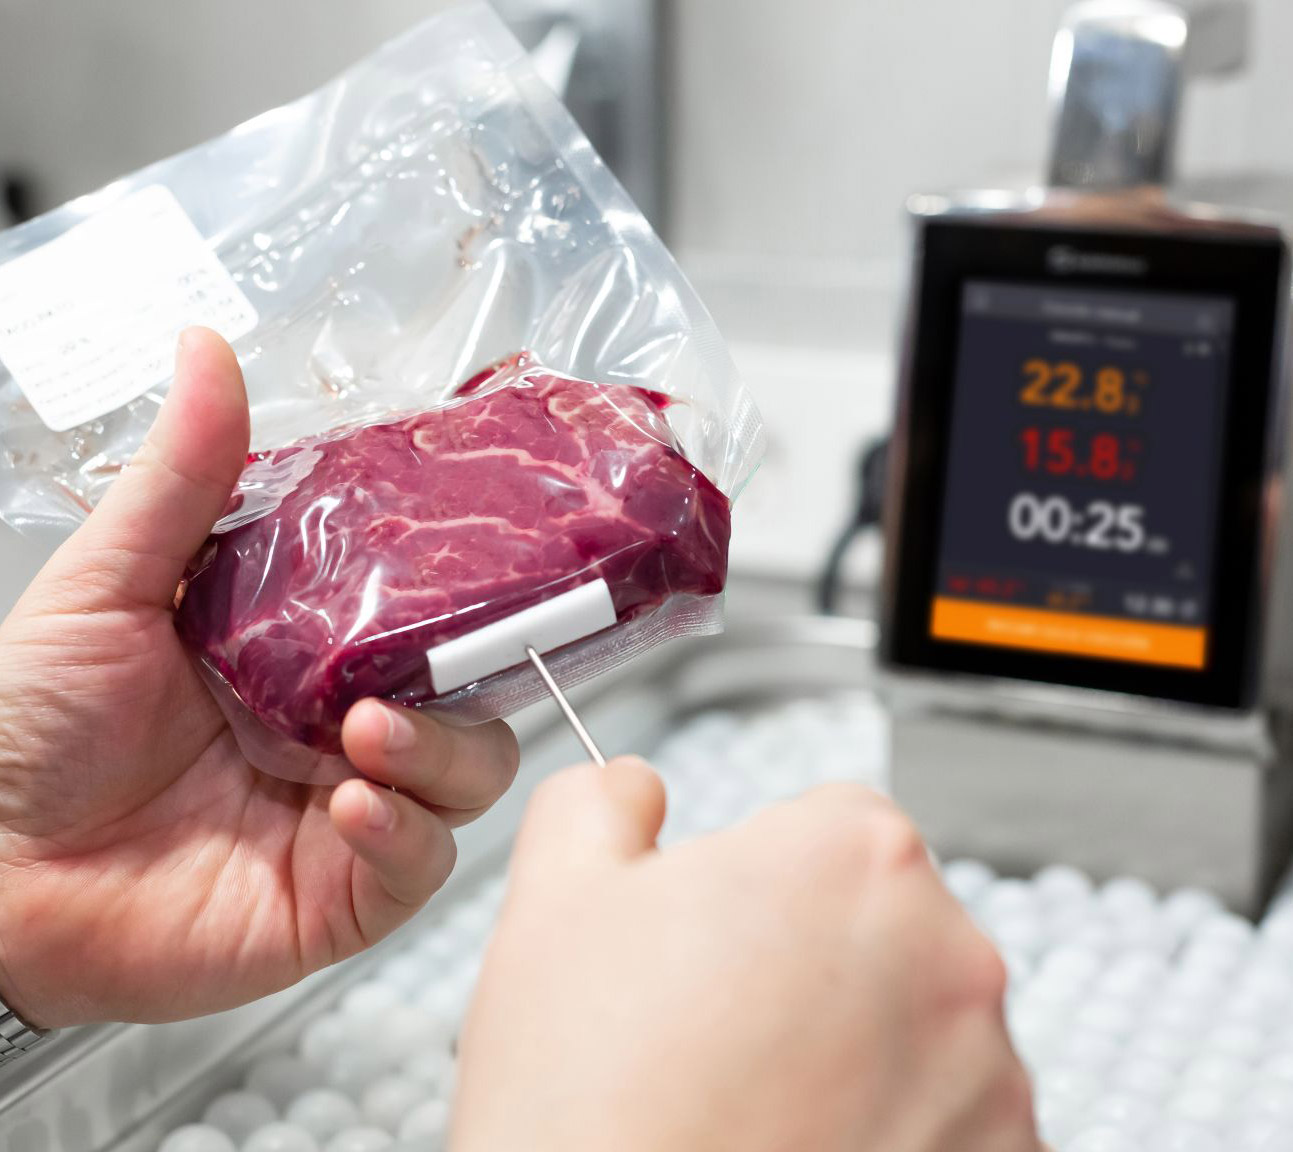 SmartVIde X, the state-of-the-art immersion circulator